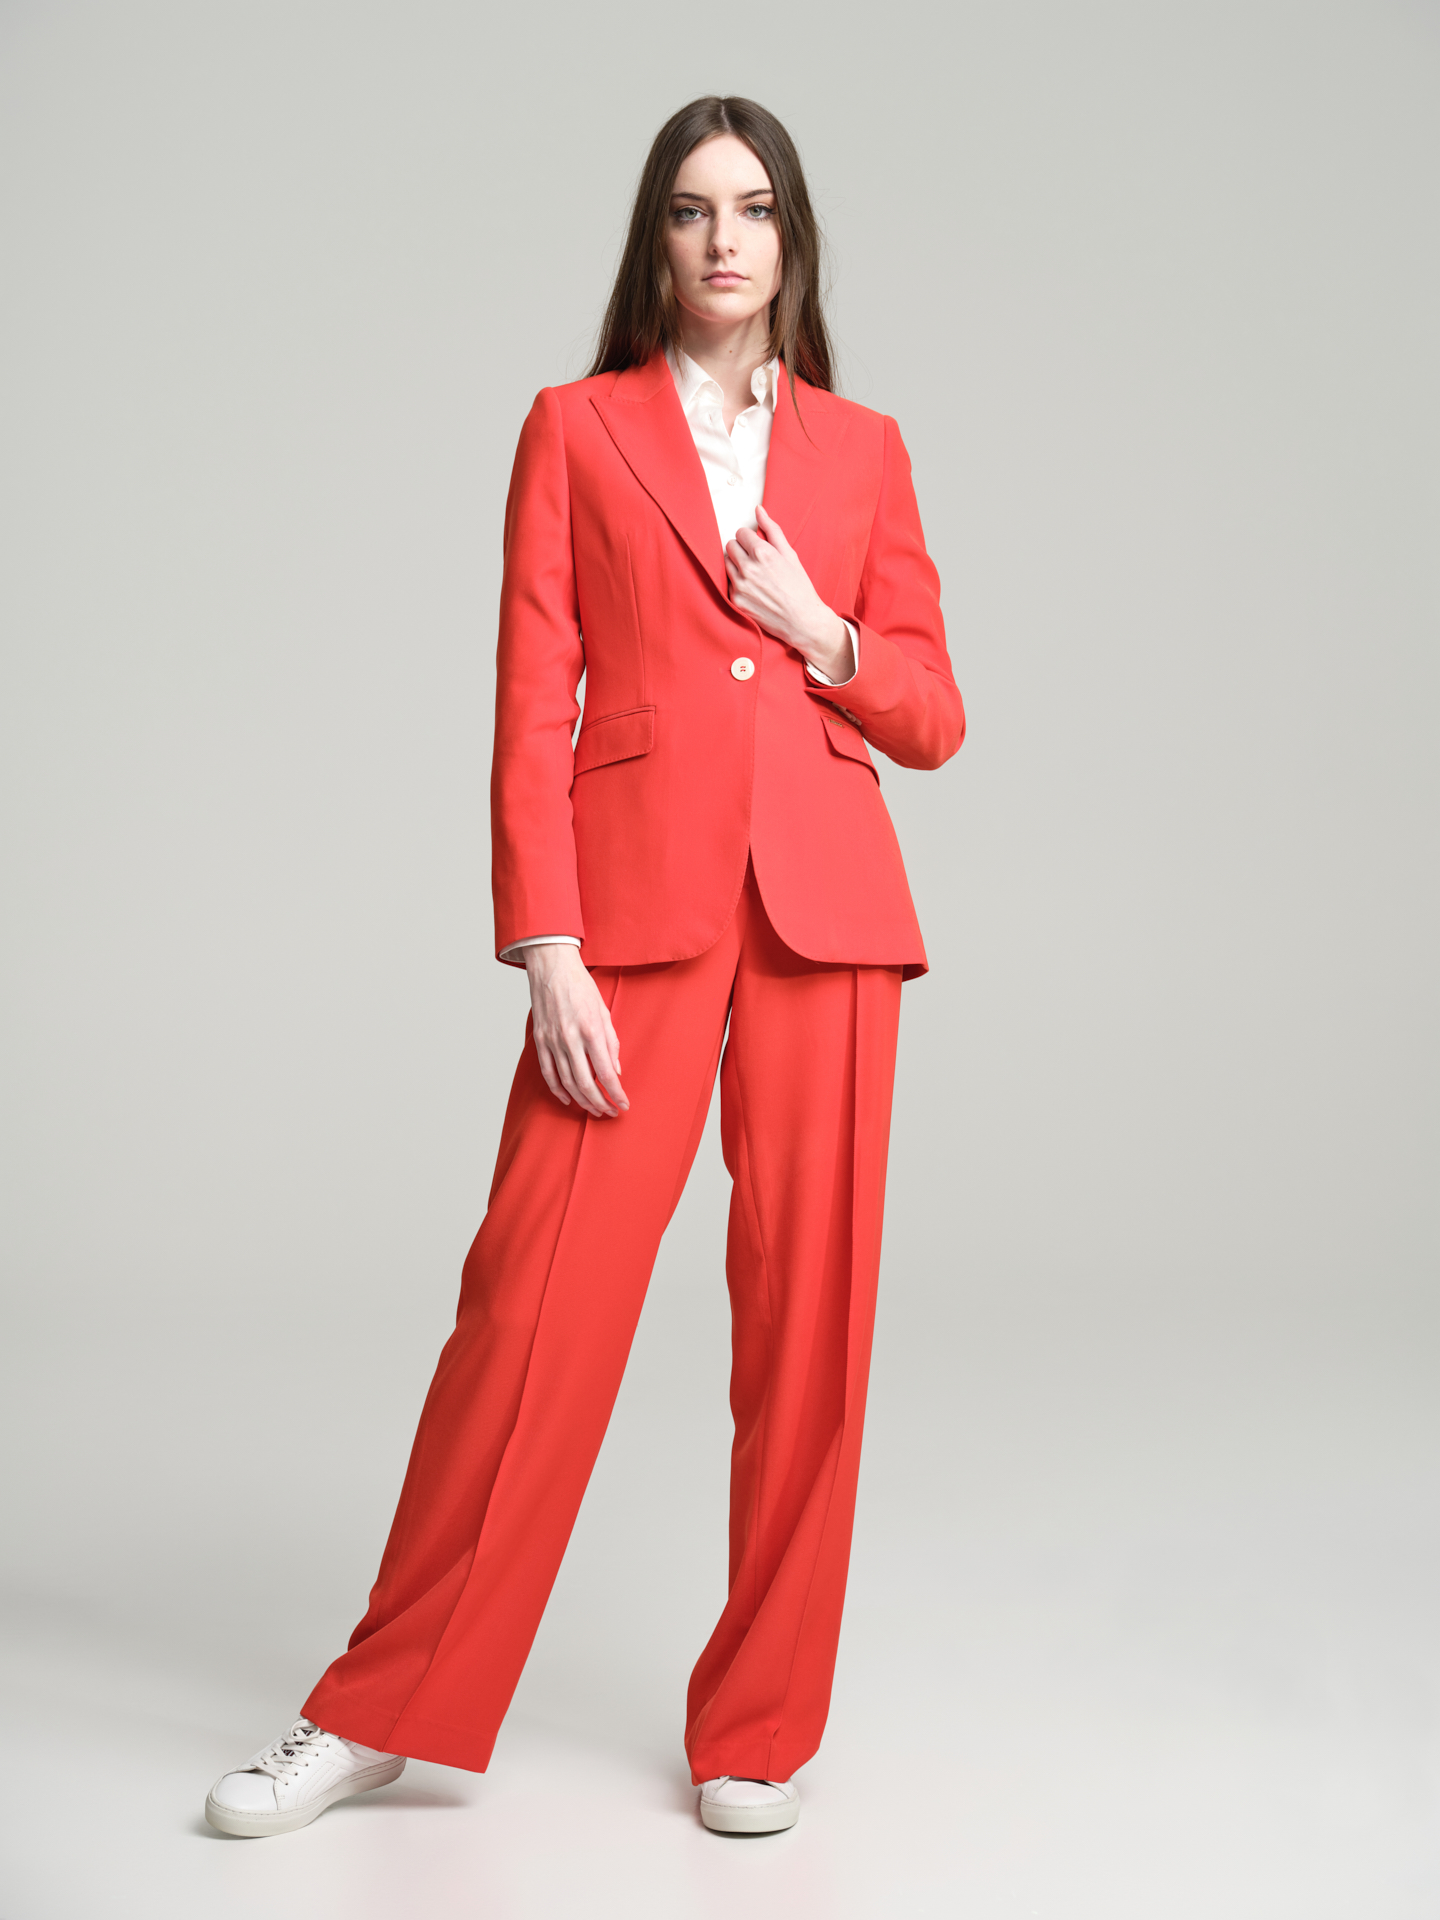 Suit Blazer Red Classic Woman